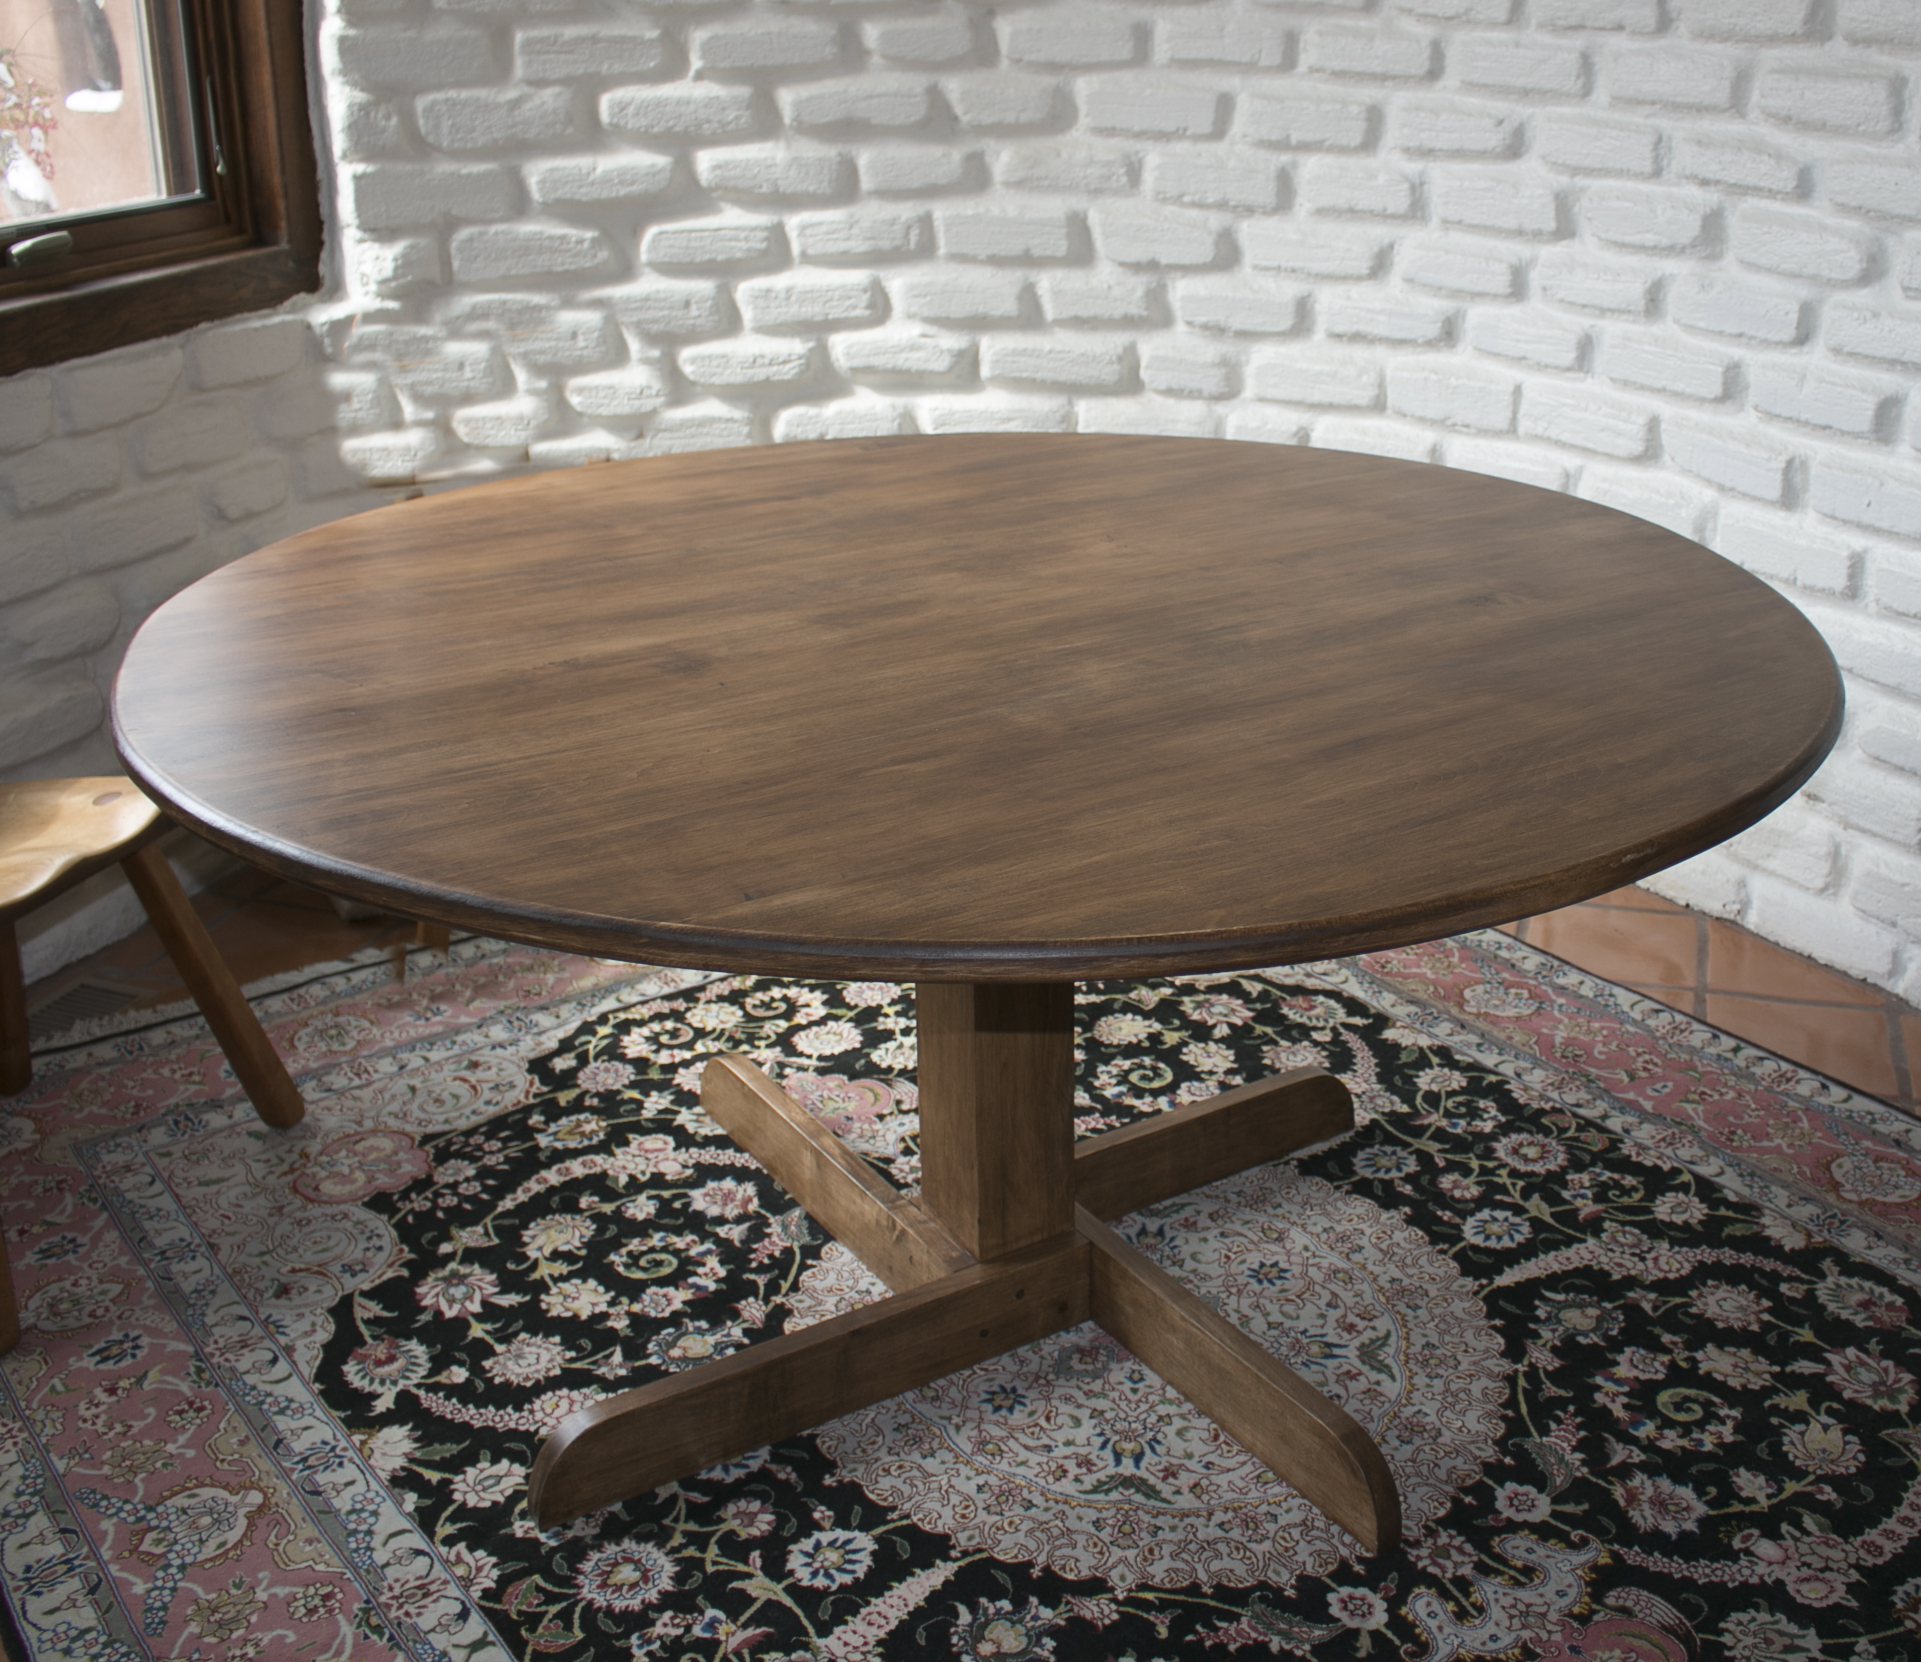 “Dining Room Round Table